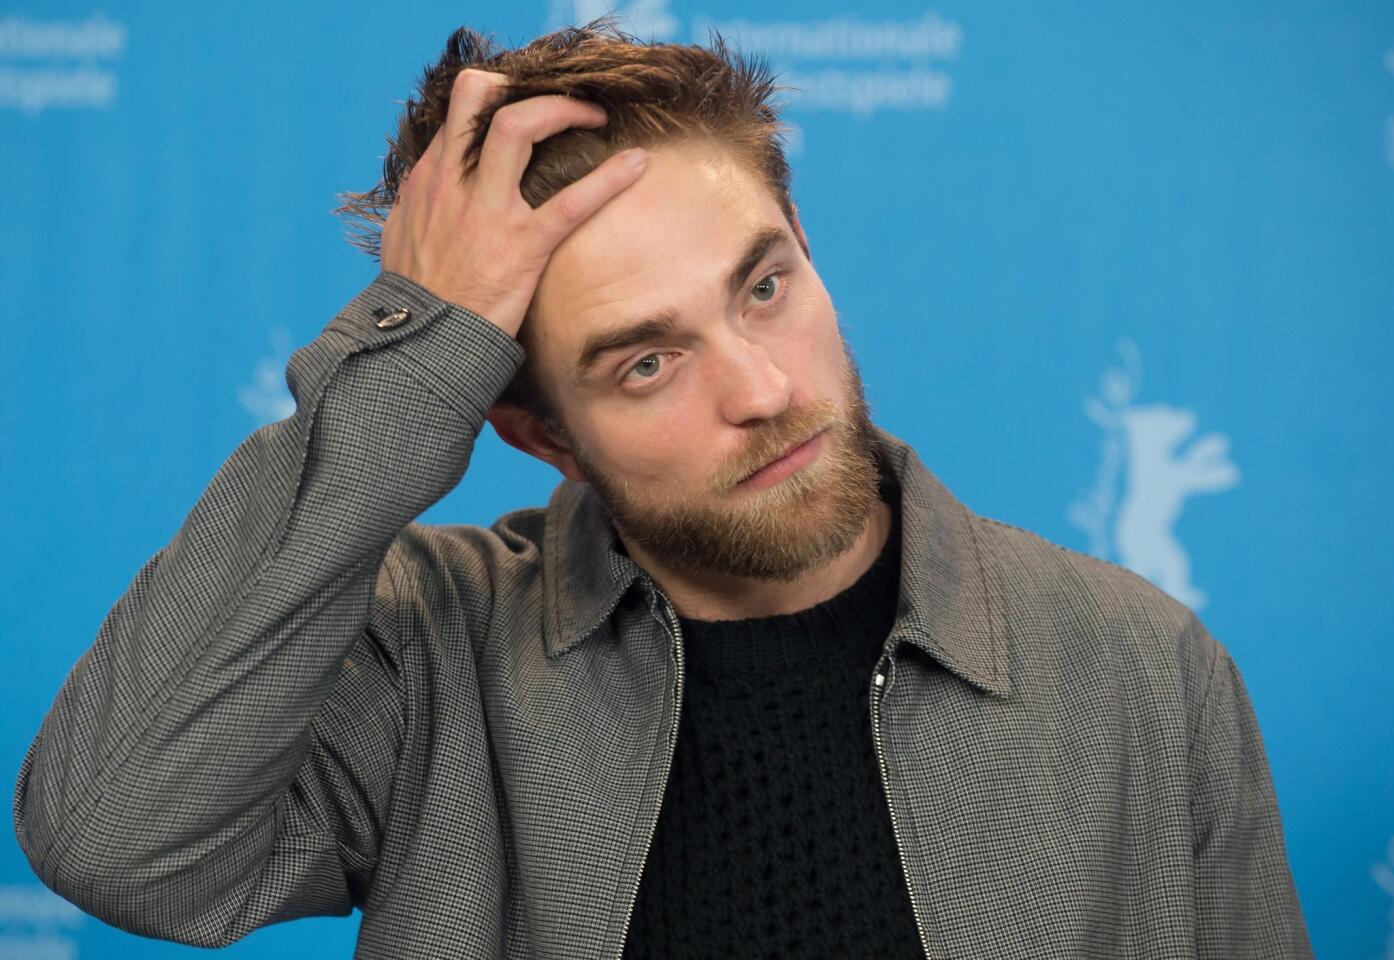 Robert Pattinson is one busy guy. Since landing the role of vampire Edward Cullen in the "Twilight" franchise, the actor seems to have done nothing but hone his craft by appearing in a diverse array of films. Let's take a look at some of his more memorable projects so far.